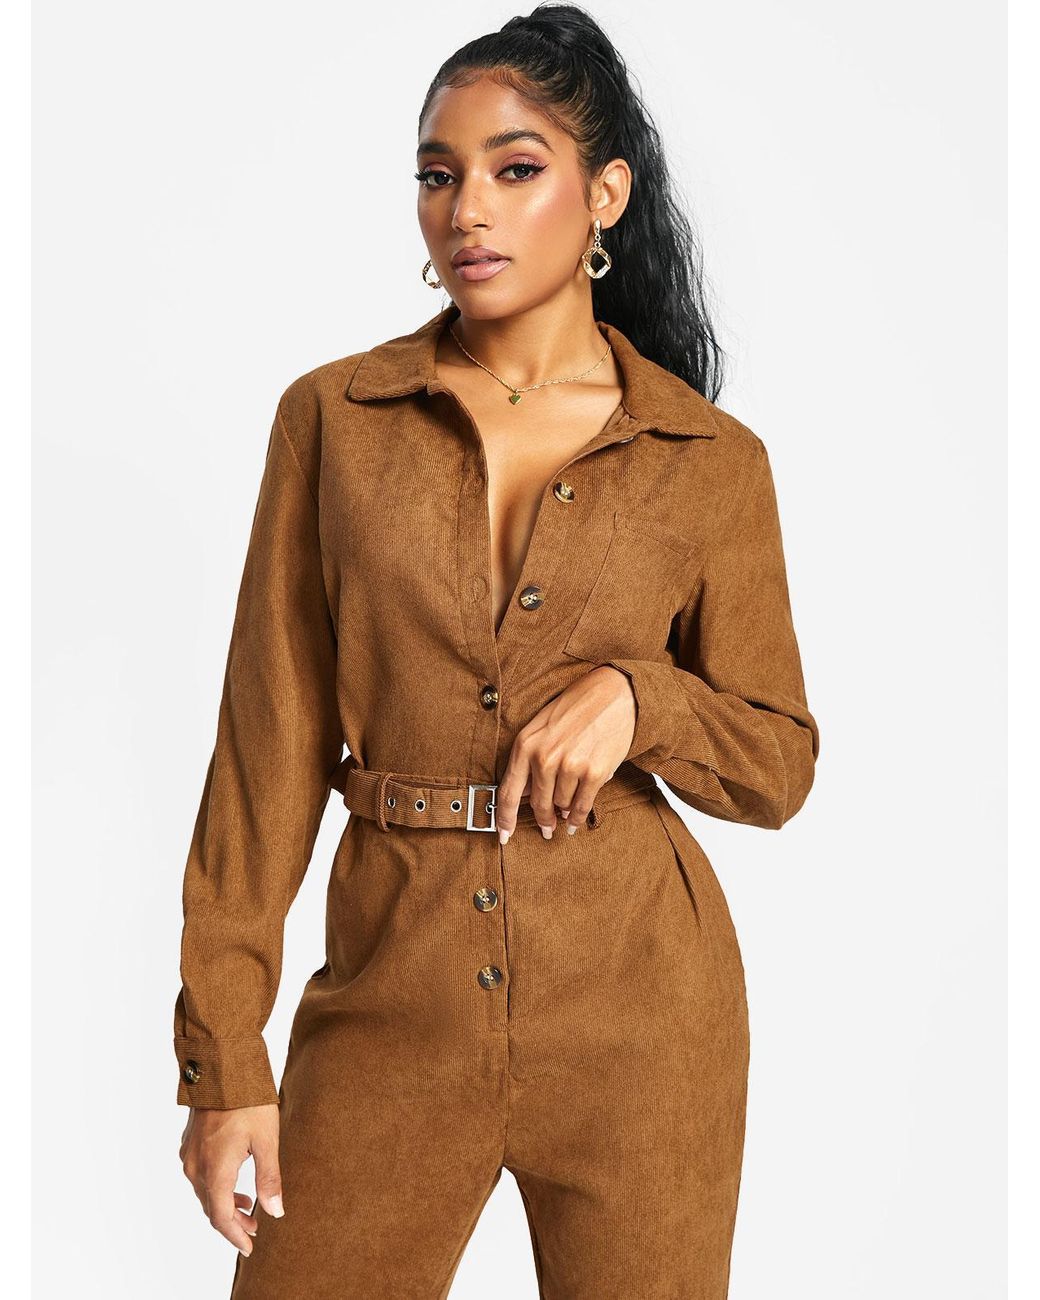 Zaful Corduroy Buckle-belted Shirt-style Jumpsuit in Natural | Lyst